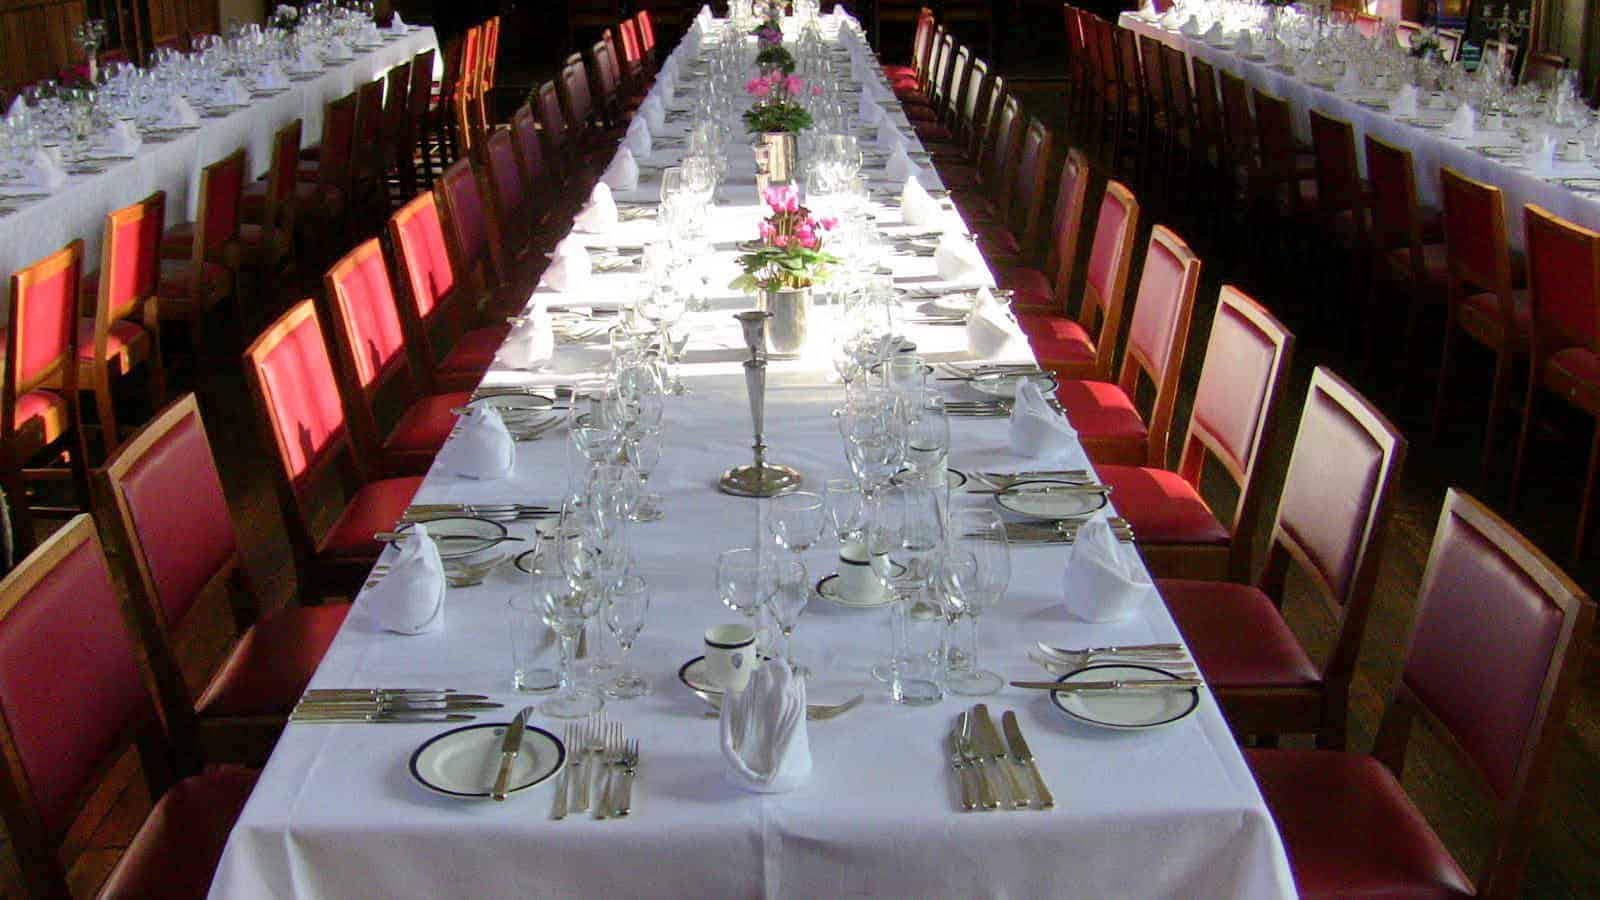 Place-settings-at-a-large-formal-dinner.-The-host-and-hostess-may-be-seated-at-another-table.jpg